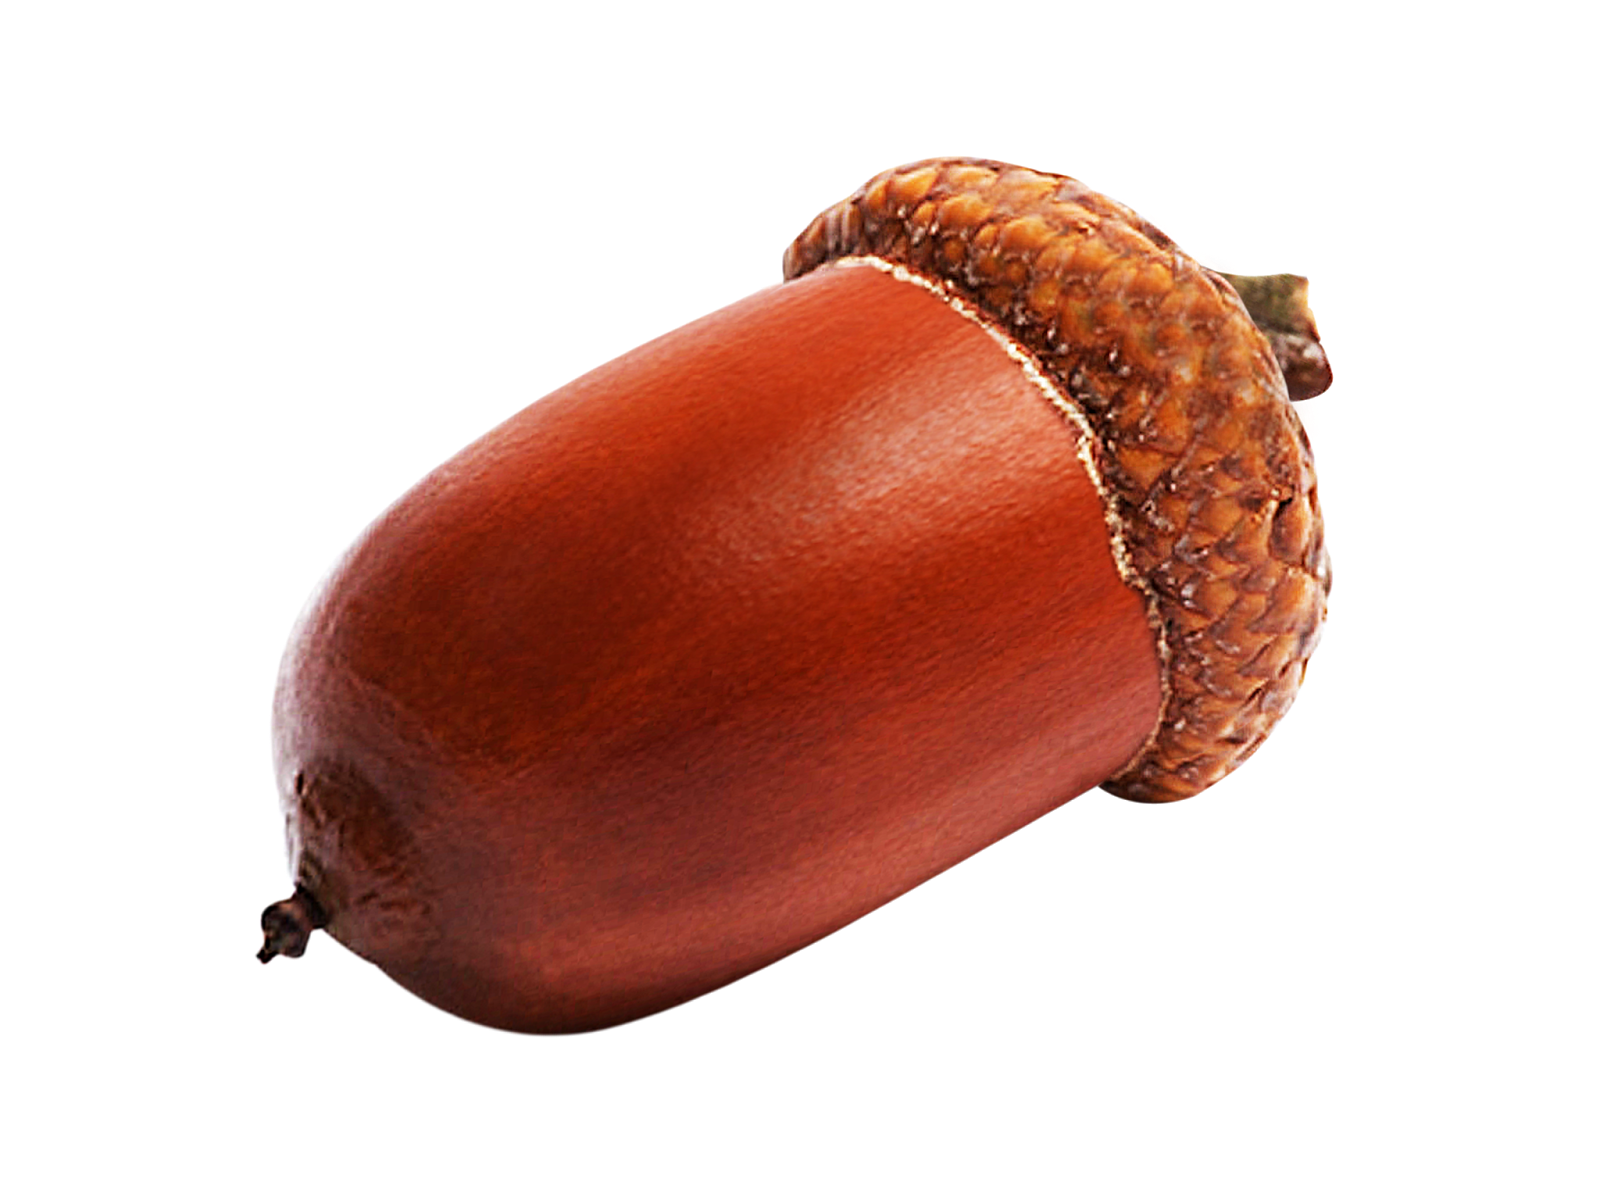 Picture Acorn Free HQ Image PNG Image